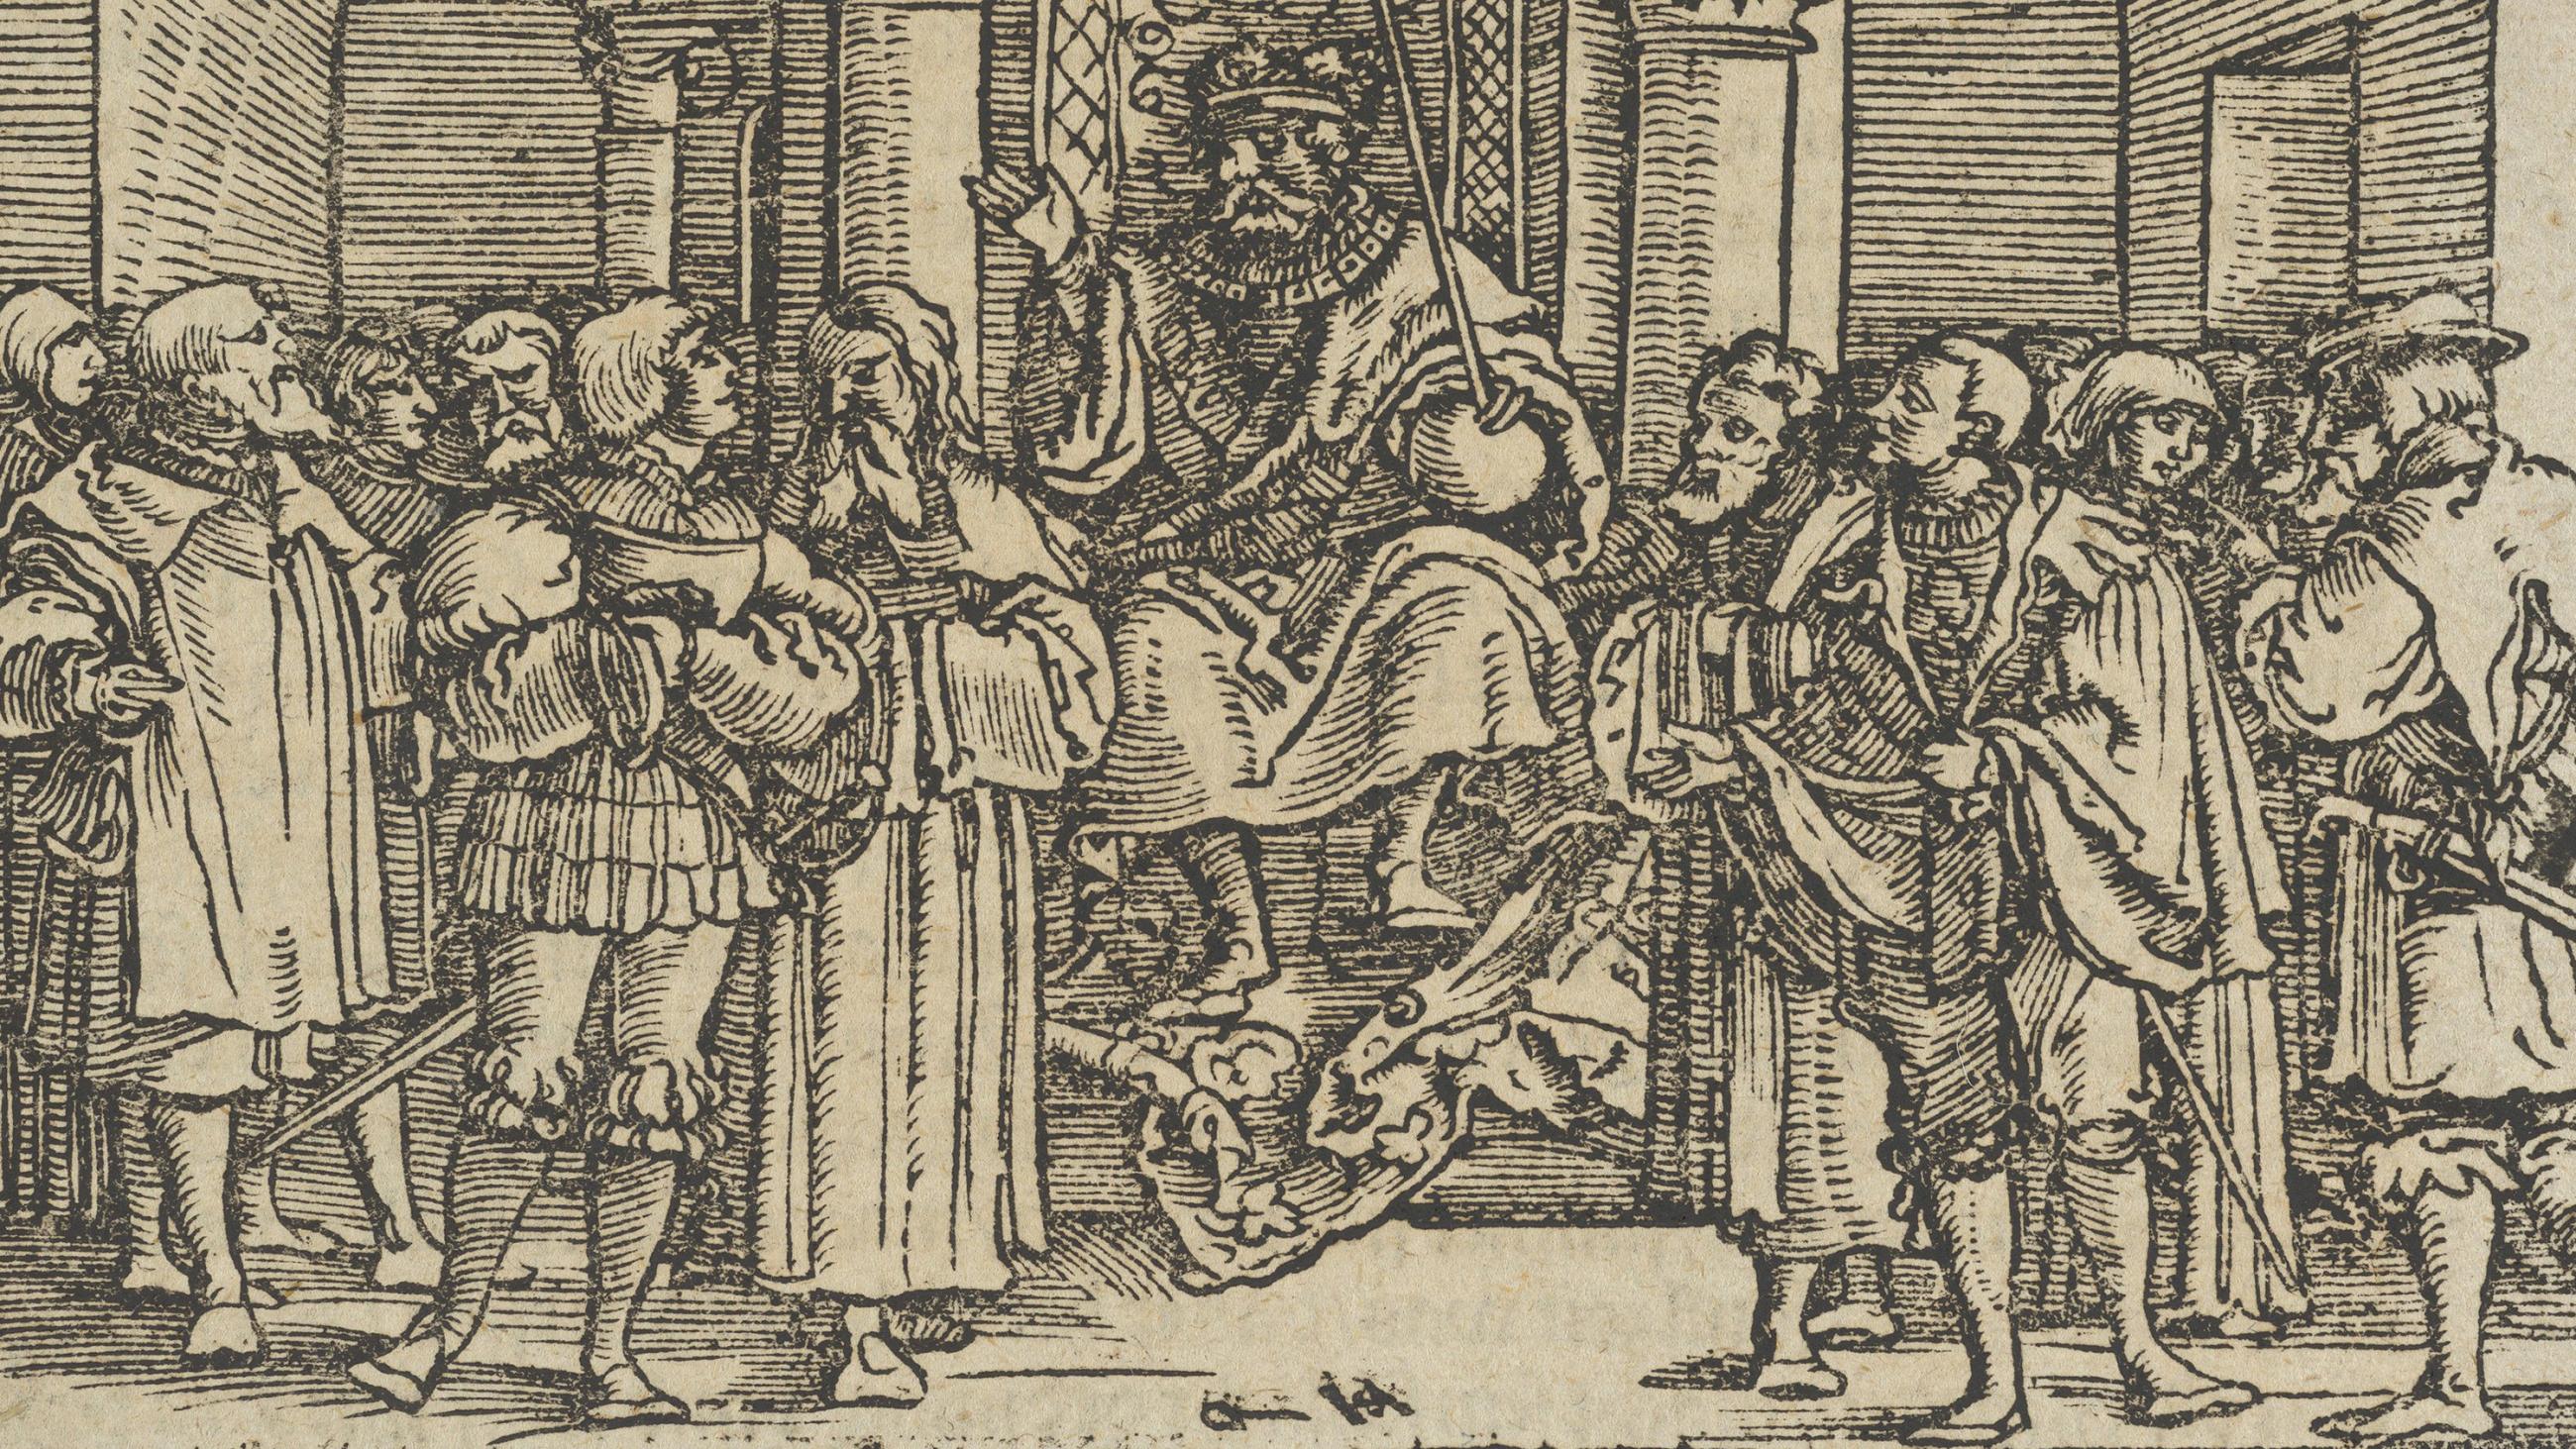 The woodcut shows a crowded court with a king on a throne.